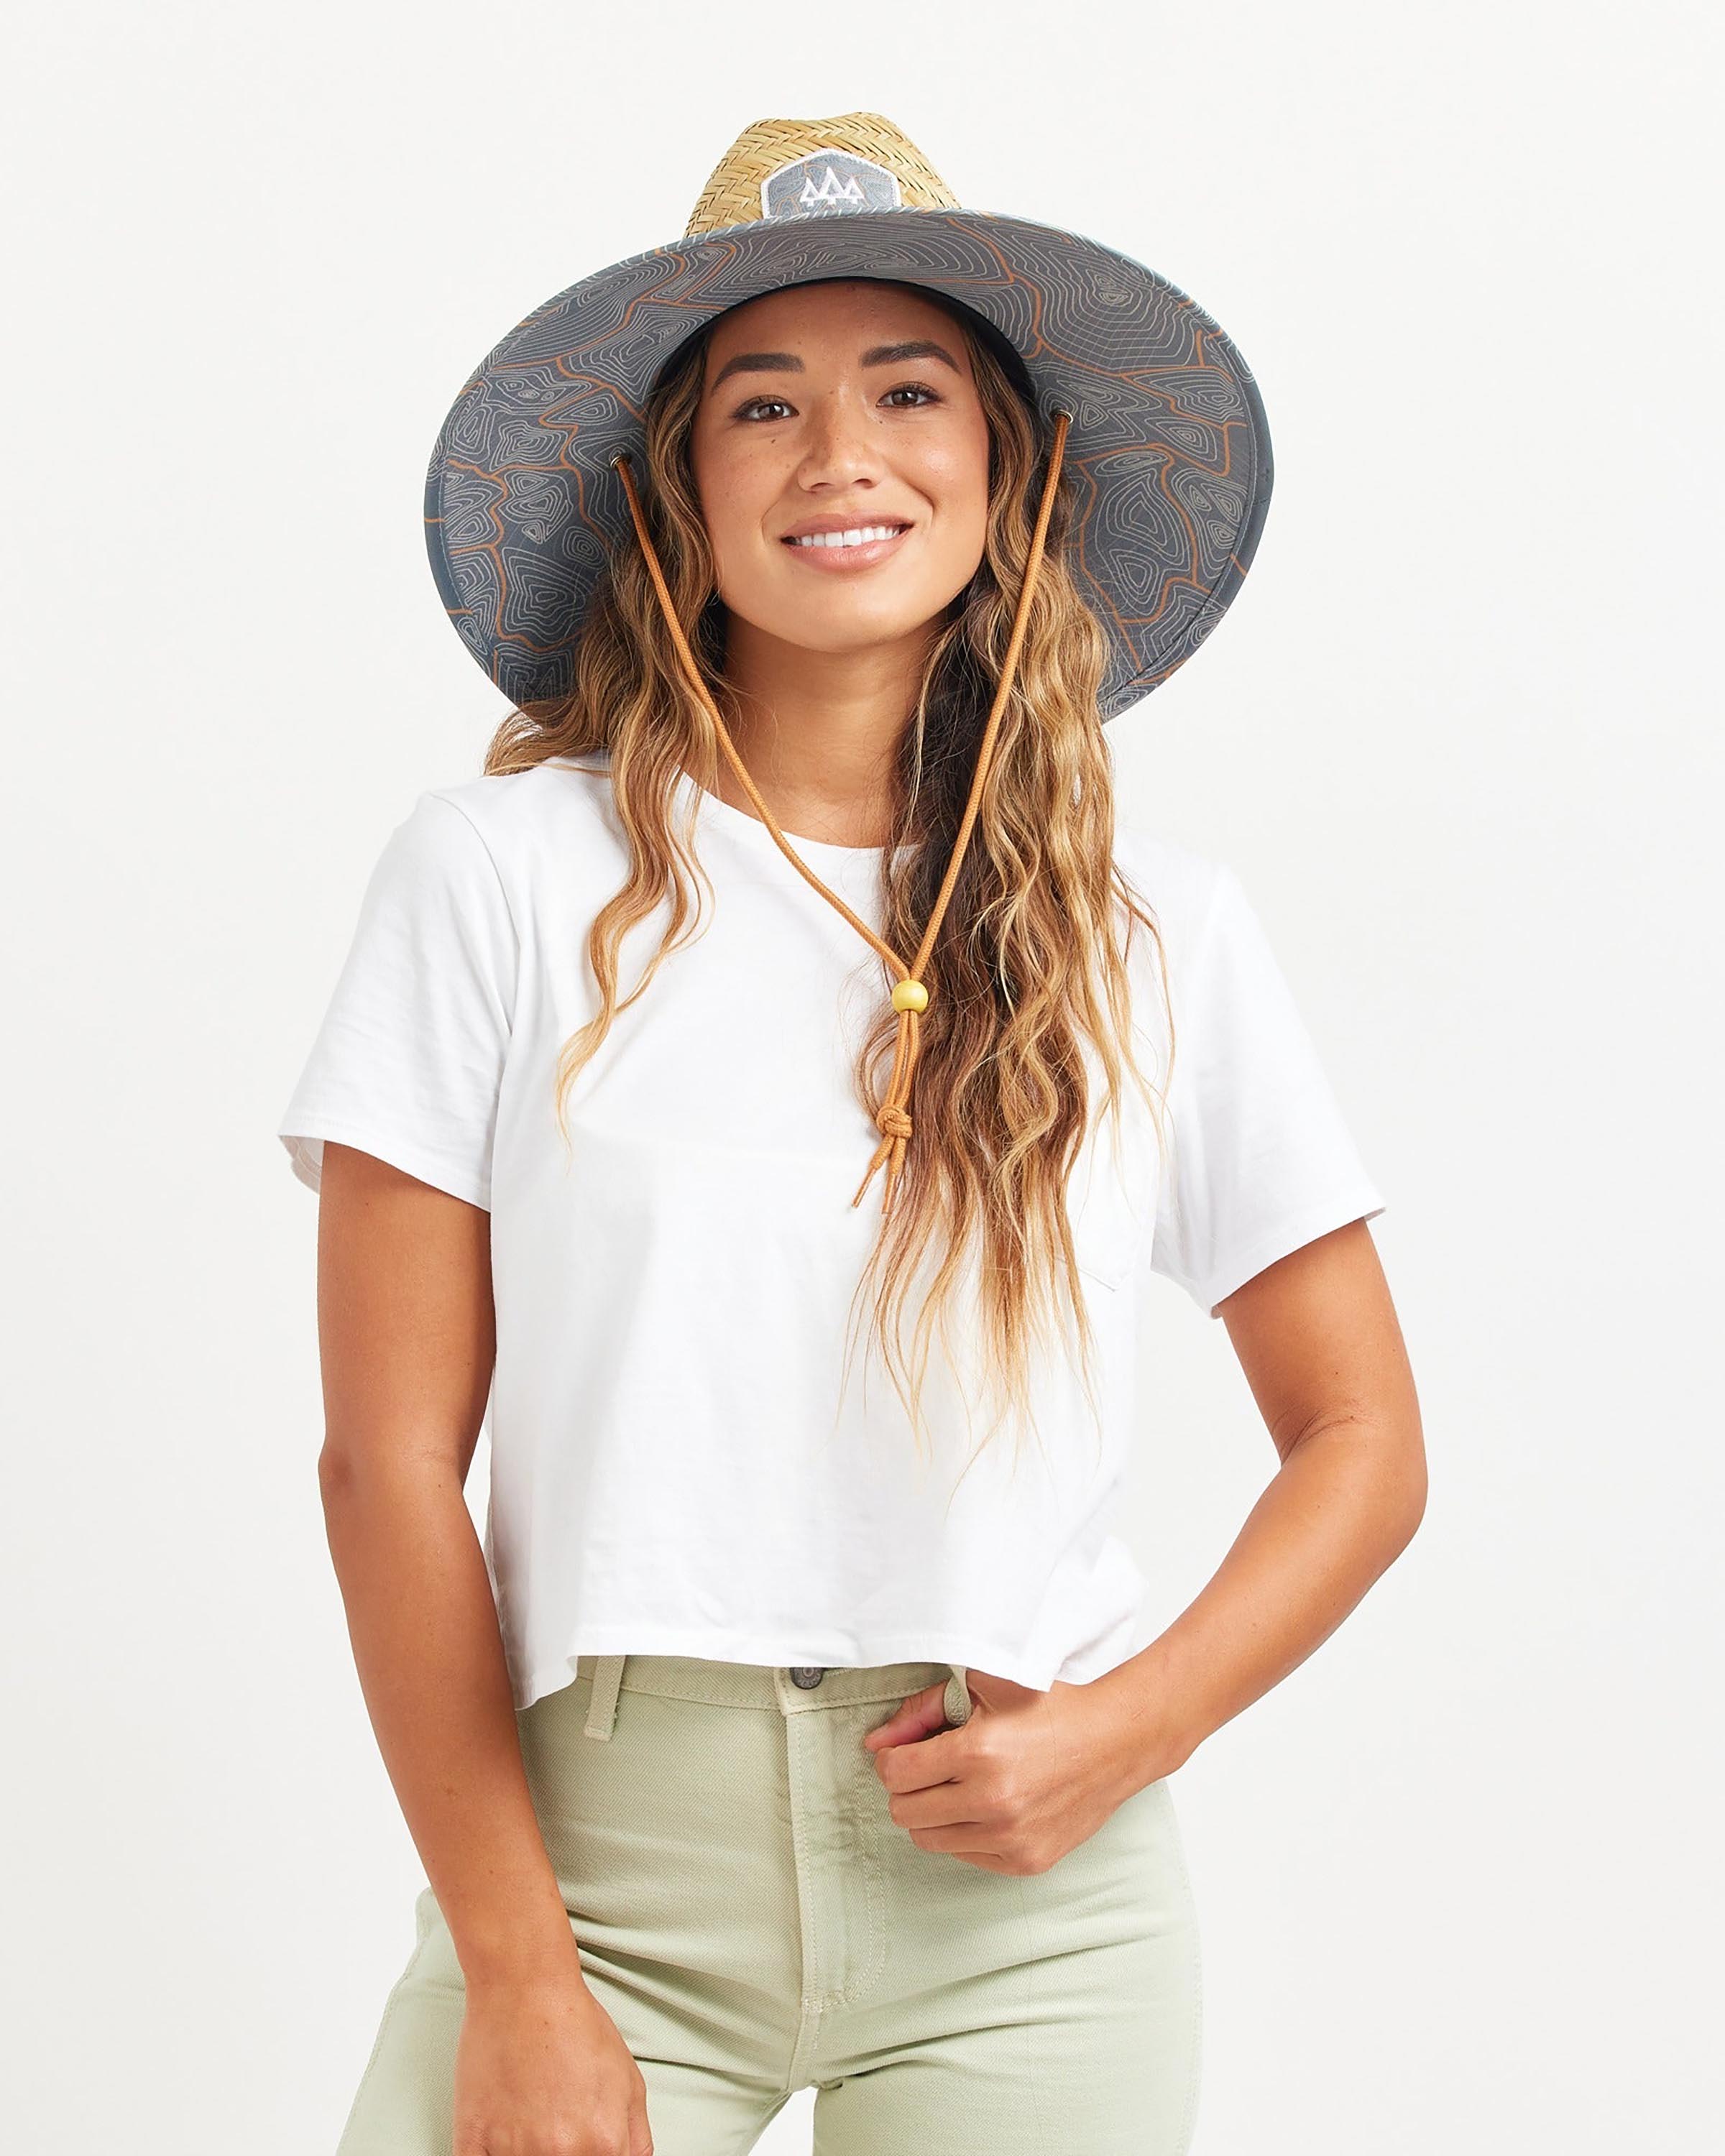 Hemlock female model looking straight wearing Nomad straw lifeguard hat with topography pattern